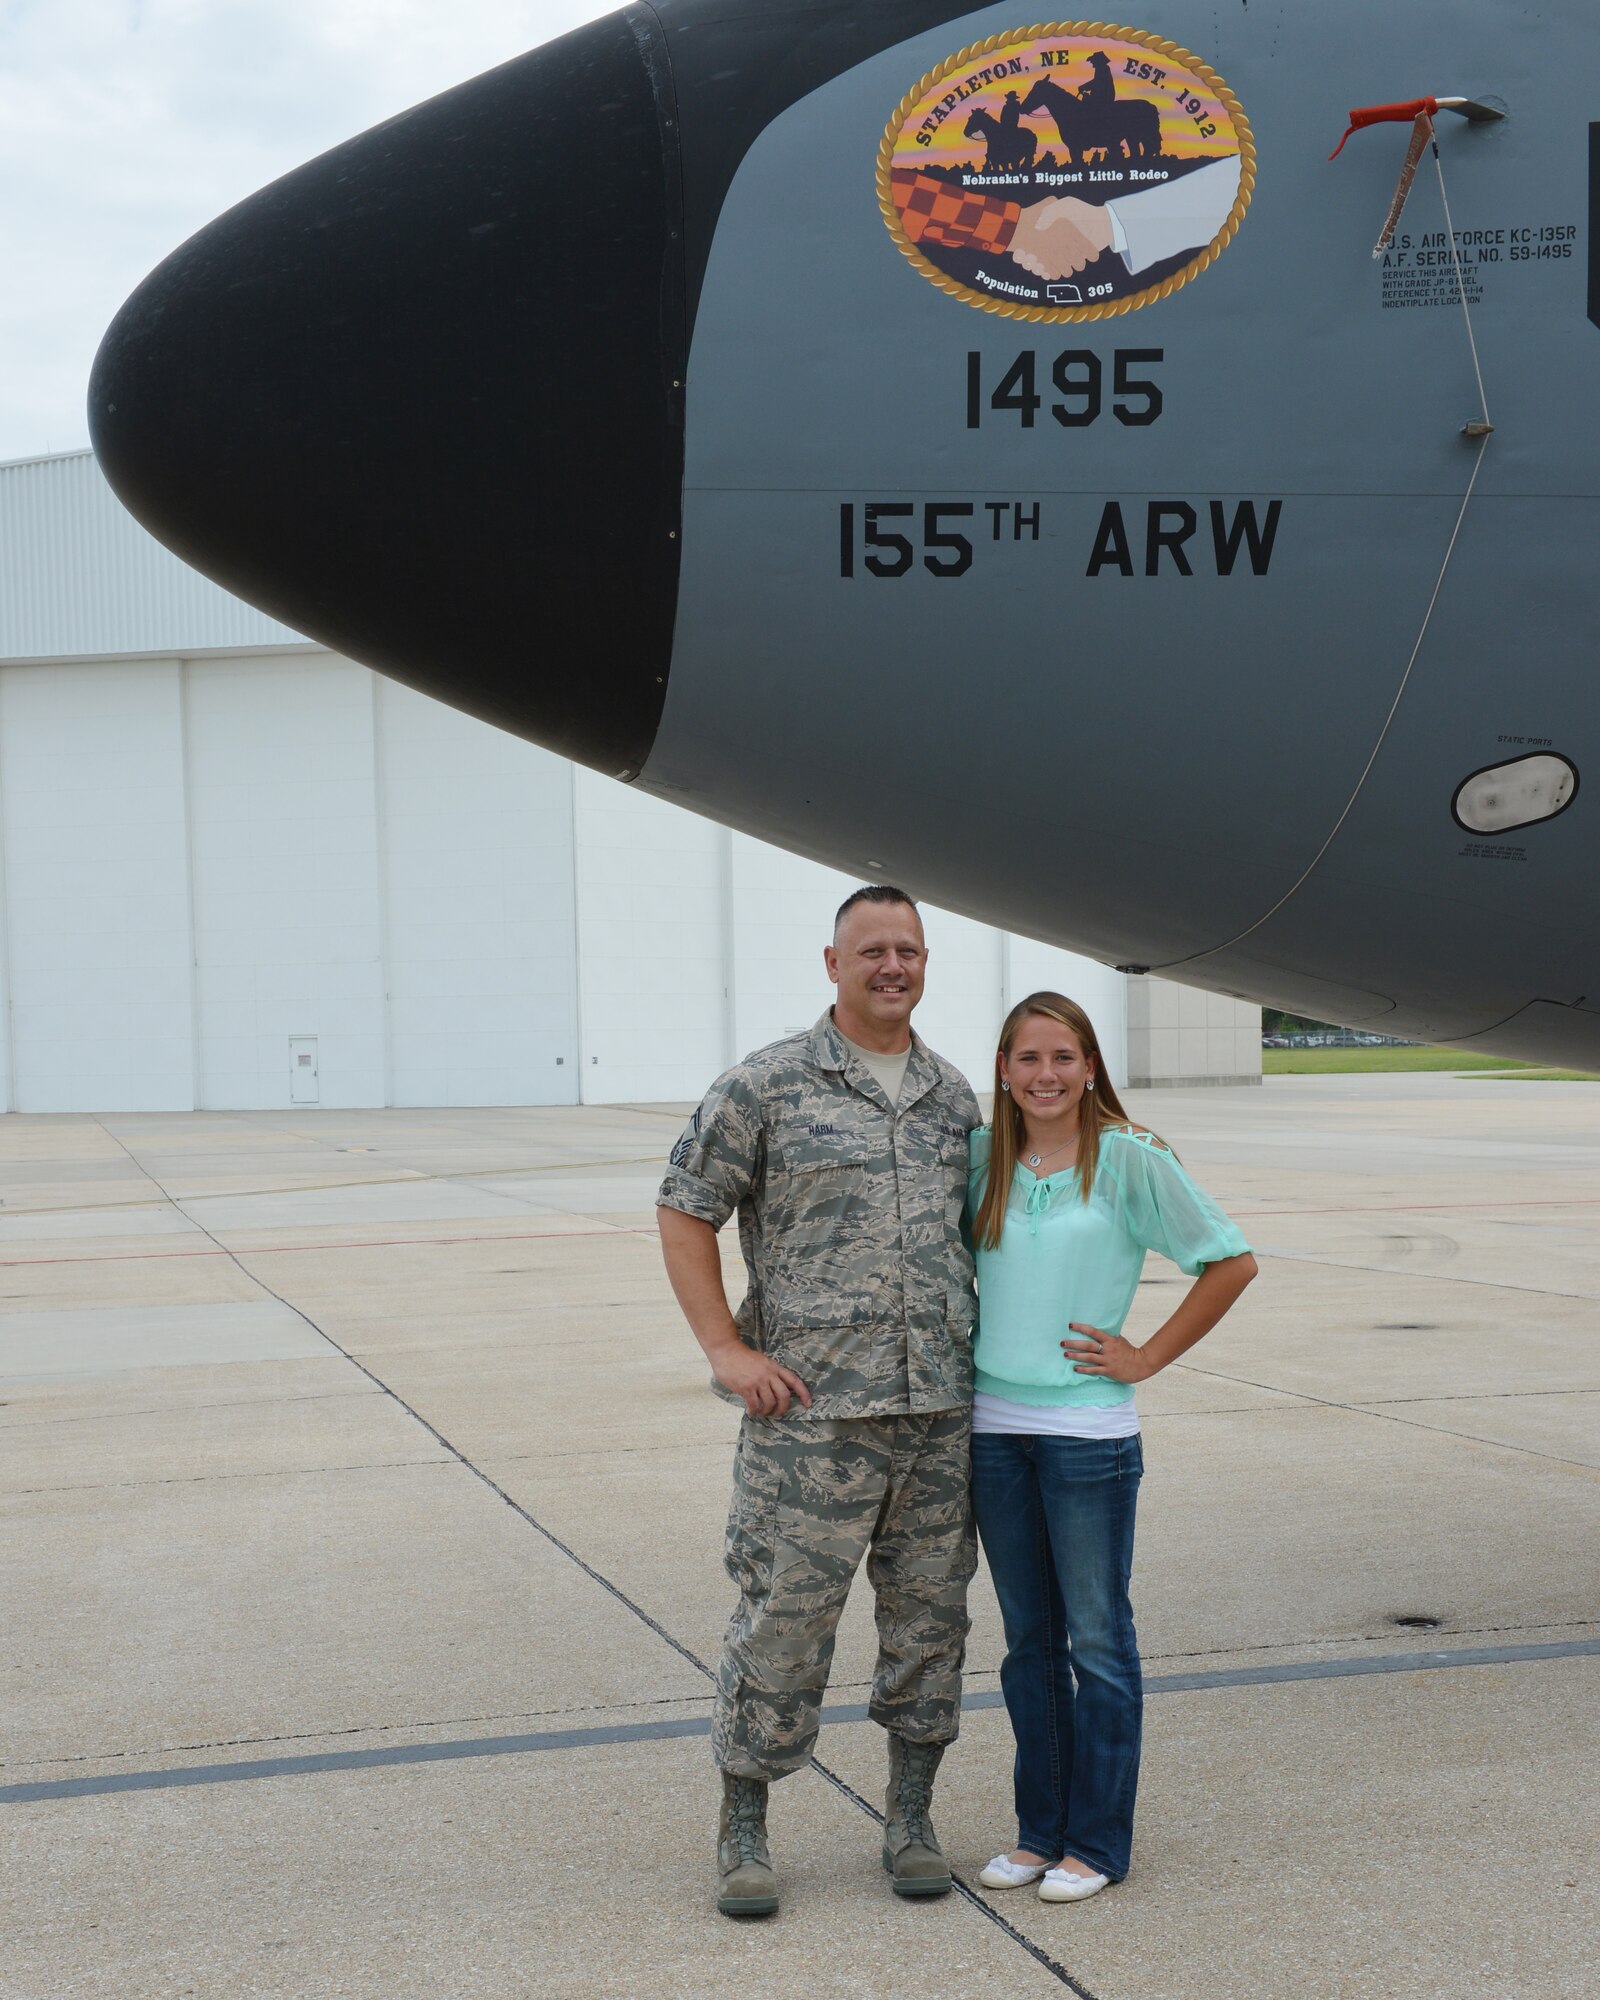 Mariah Harm, a Stapleton, Neb., native and senior at Stapleton High School, stands with her father, Senior Master Sgt. Toby Harm, after unveiling her artwork on the nose of a KC-135R Stratotanker at the 155th Air Refueling Wing, Nebraska Air National Guard Base Aug. 8, in Lincoln, Neb.